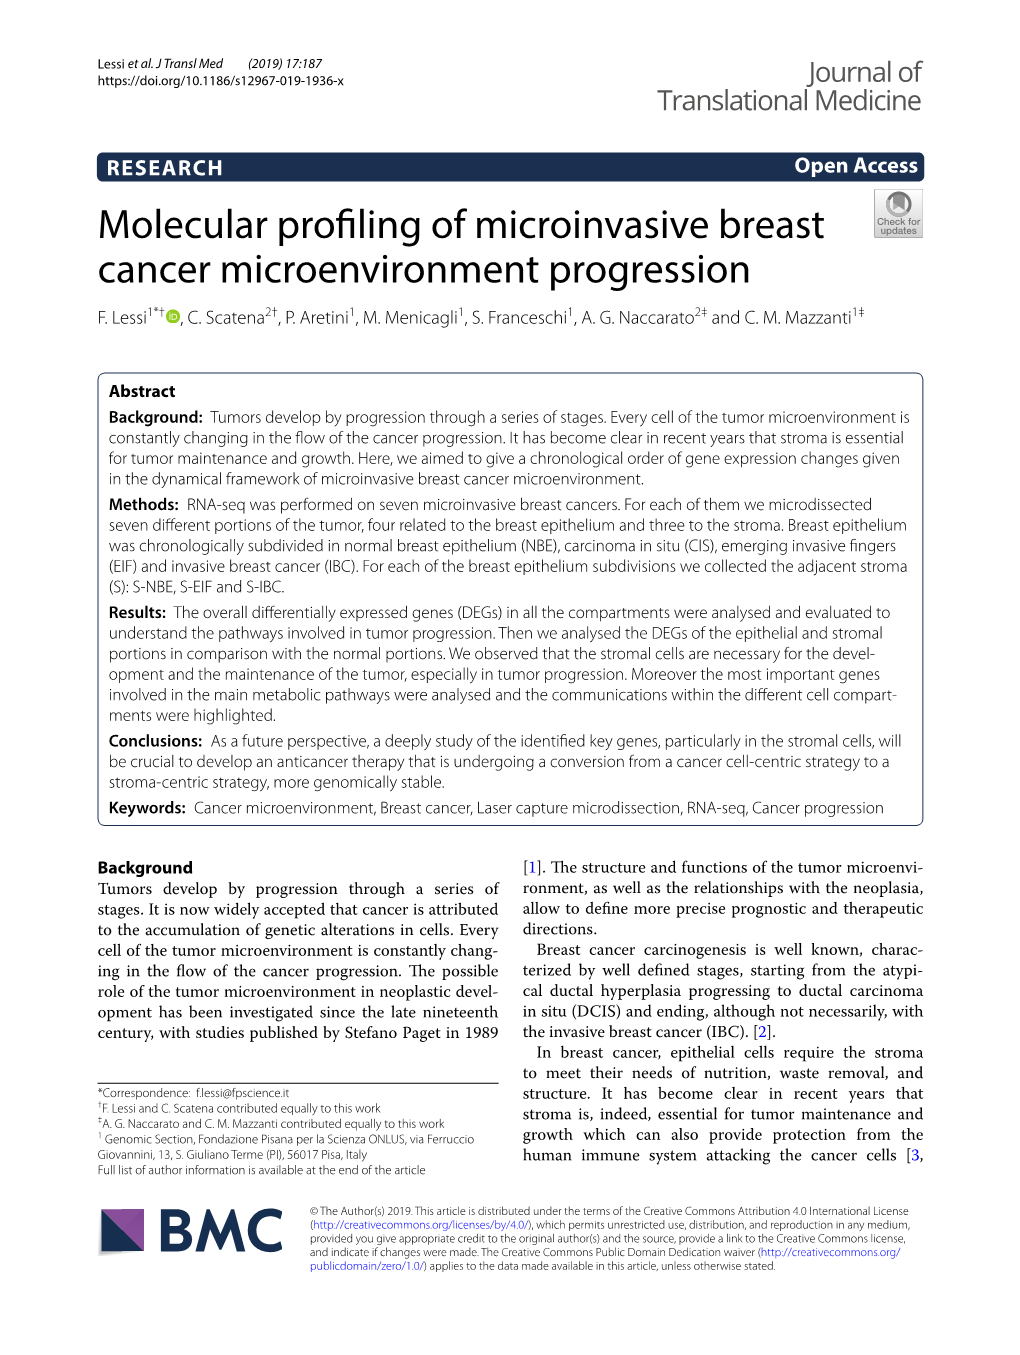 Molecular Profiling of Microinvasive Breast Cancer Microenvironment